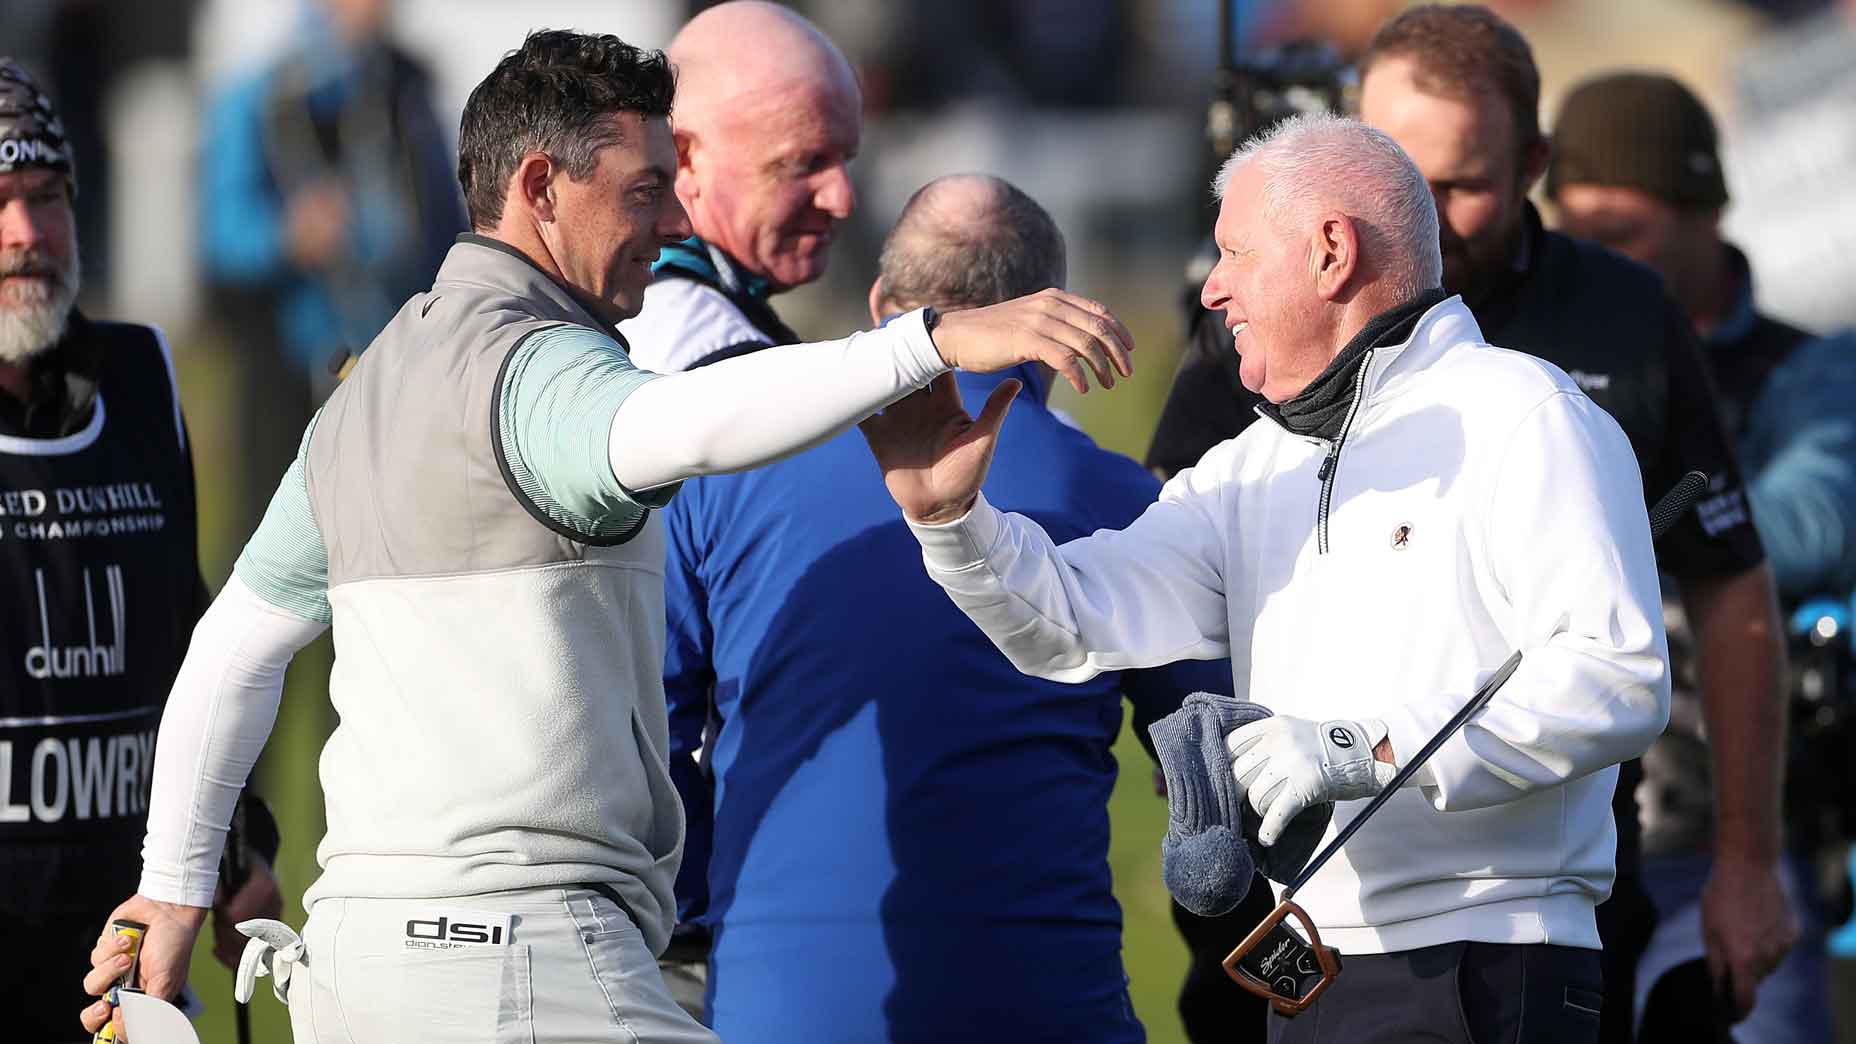 Rory McIlroy’s dad mishits, and hot mics DO NOT miss his 2-word reaction